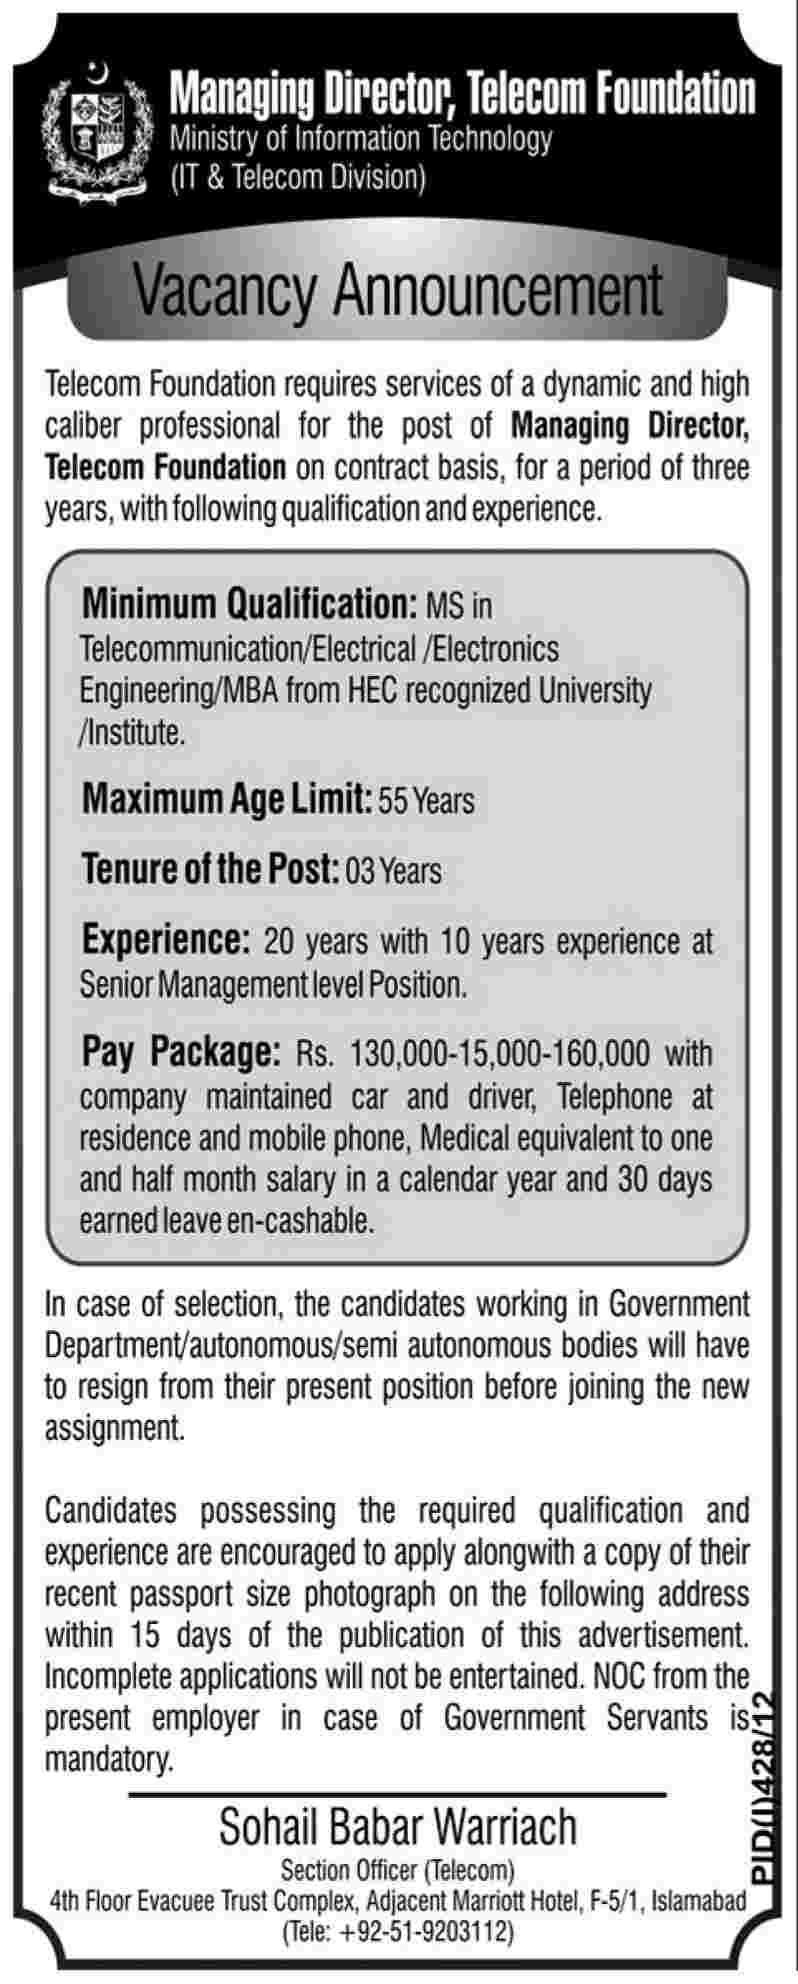 Telecom Foundation Requires Managing Director Under Ministry of Information Technology (Government Job)